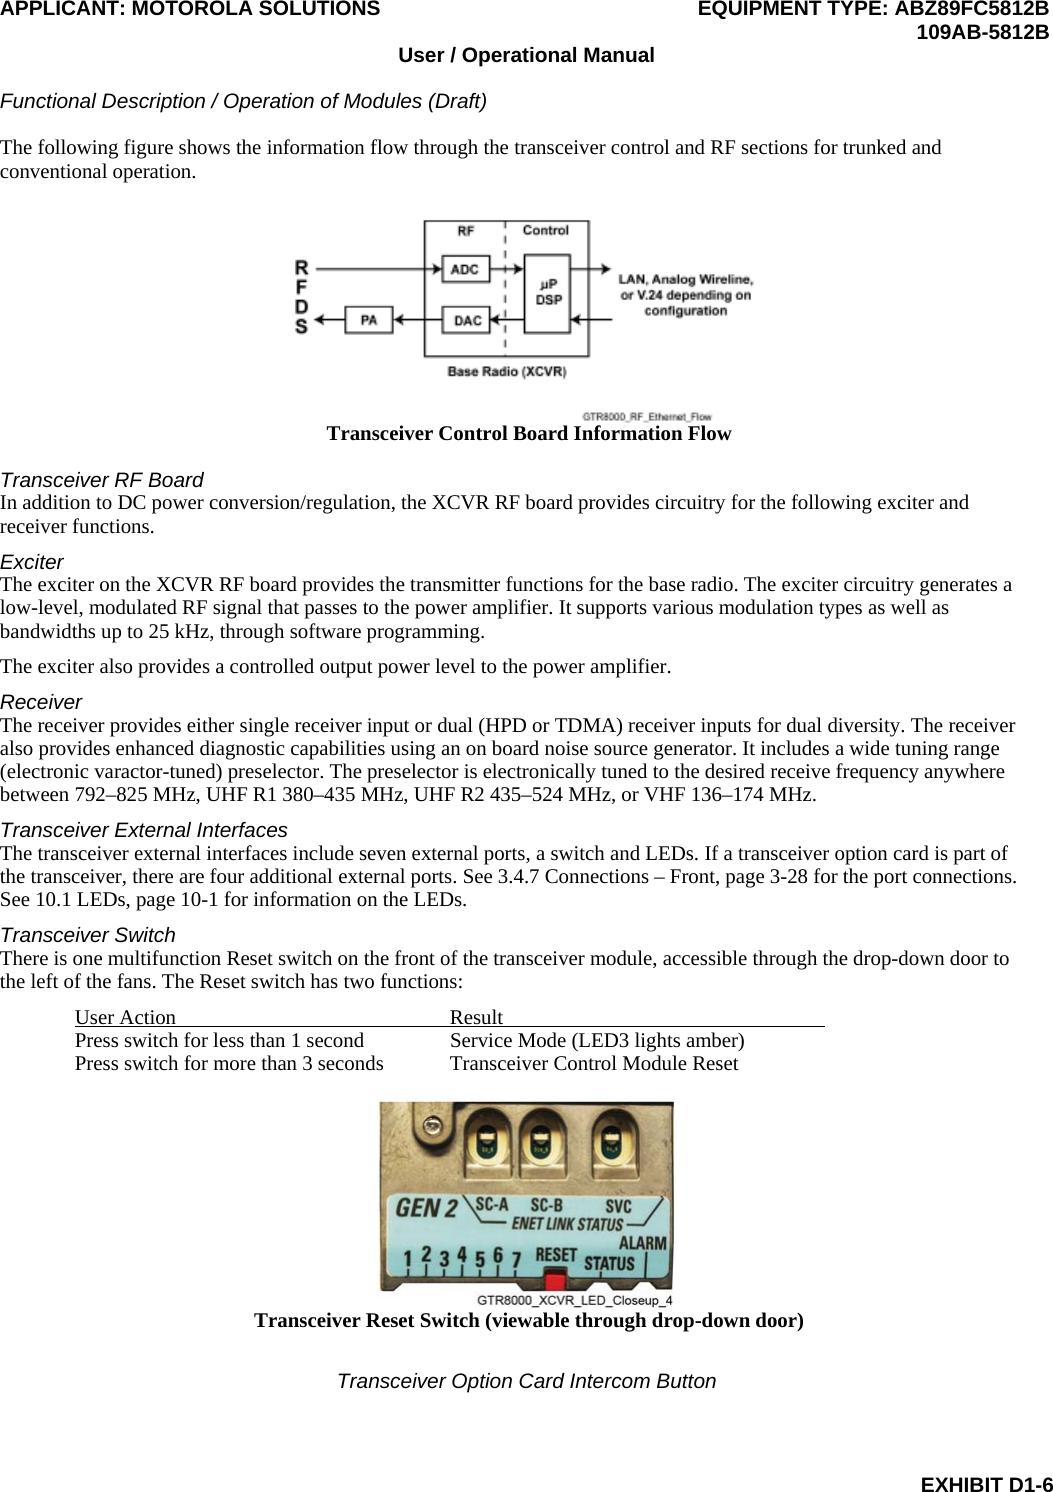 APPLICANT: MOTOROLA SOLUTIONS EQUIPMENT TYPE: ABZ89FC5812B  109AB-5812B User / Operational Manual  Functional Description / Operation of Modules (Draft)  EXHIBIT D1-6 The following figure shows the information flow through the transceiver control and RF sections for trunked and conventional operation.  Transceiver Control Board Information Flow  Transceiver RF Board In addition to DC power conversion/regulation, the XCVR RF board provides circuitry for the following exciter and receiver functions. Exciter The exciter on the XCVR RF board provides the transmitter functions for the base radio. The exciter circuitry generates a low-level, modulated RF signal that passes to the power amplifier. It supports various modulation types as well as bandwidths up to 25 kHz, through software programming. The exciter also provides a controlled output power level to the power amplifier. Receiver The receiver provides either single receiver input or dual (HPD or TDMA) receiver inputs for dual diversity. The receiver also provides enhanced diagnostic capabilities using an on board noise source generator. It includes a wide tuning range (electronic varactor-tuned) preselector. The preselector is electronically tuned to the desired receive frequency anywhere between 792–825 MHz, UHF R1 380–435 MHz, UHF R2 435–524 MHz, or VHF 136–174 MHz. Transceiver External Interfaces The transceiver external interfaces include seven external ports, a switch and LEDs. If a transceiver option card is part of the transceiver, there are four additional external ports. See 3.4.7 Connections – Front, page 3-28 for the port connections. See 10.1 LEDs, page 10-1 for information on the LEDs. Transceiver Switch There is one multifunction Reset switch on the front of the transceiver module, accessible through the drop-down door to the left of the fans. The Reset switch has two functions: User Action  Result   Press switch for less than 1 second  Service Mode (LED3 lights amber) Press switch for more than 3 seconds  Transceiver Control Module Reset   Transceiver Reset Switch (viewable through drop-down door)  Transceiver Option Card Intercom Button 